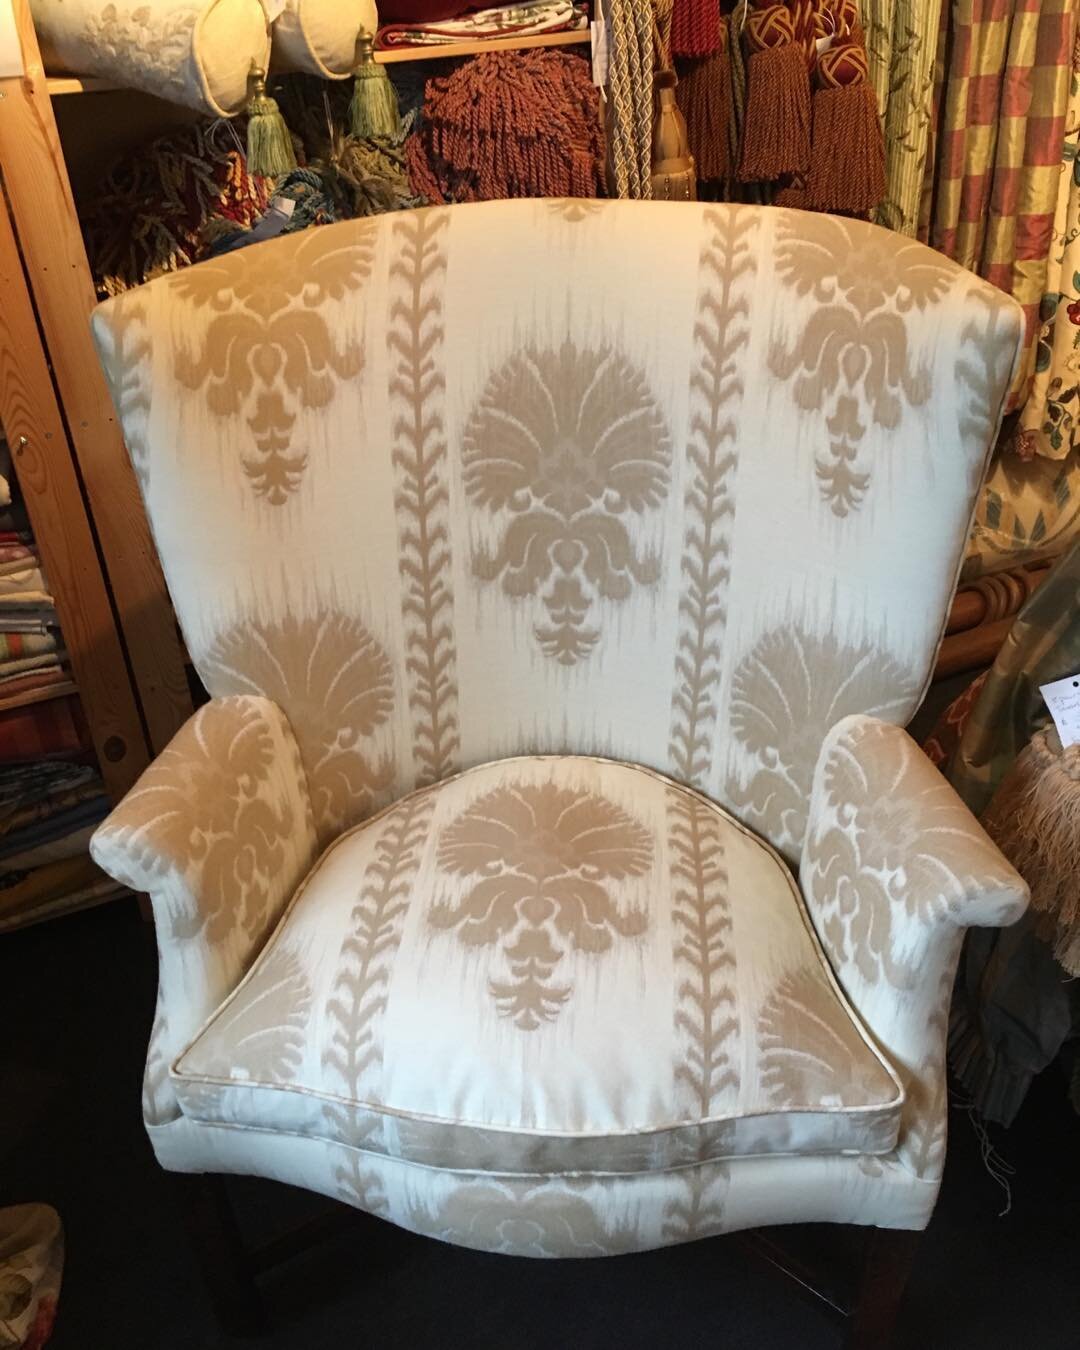 Beautiful antique wing chair restored and recovered in a Hodsell Mackenzie fabric. #wing chair #upholstery #antique chair